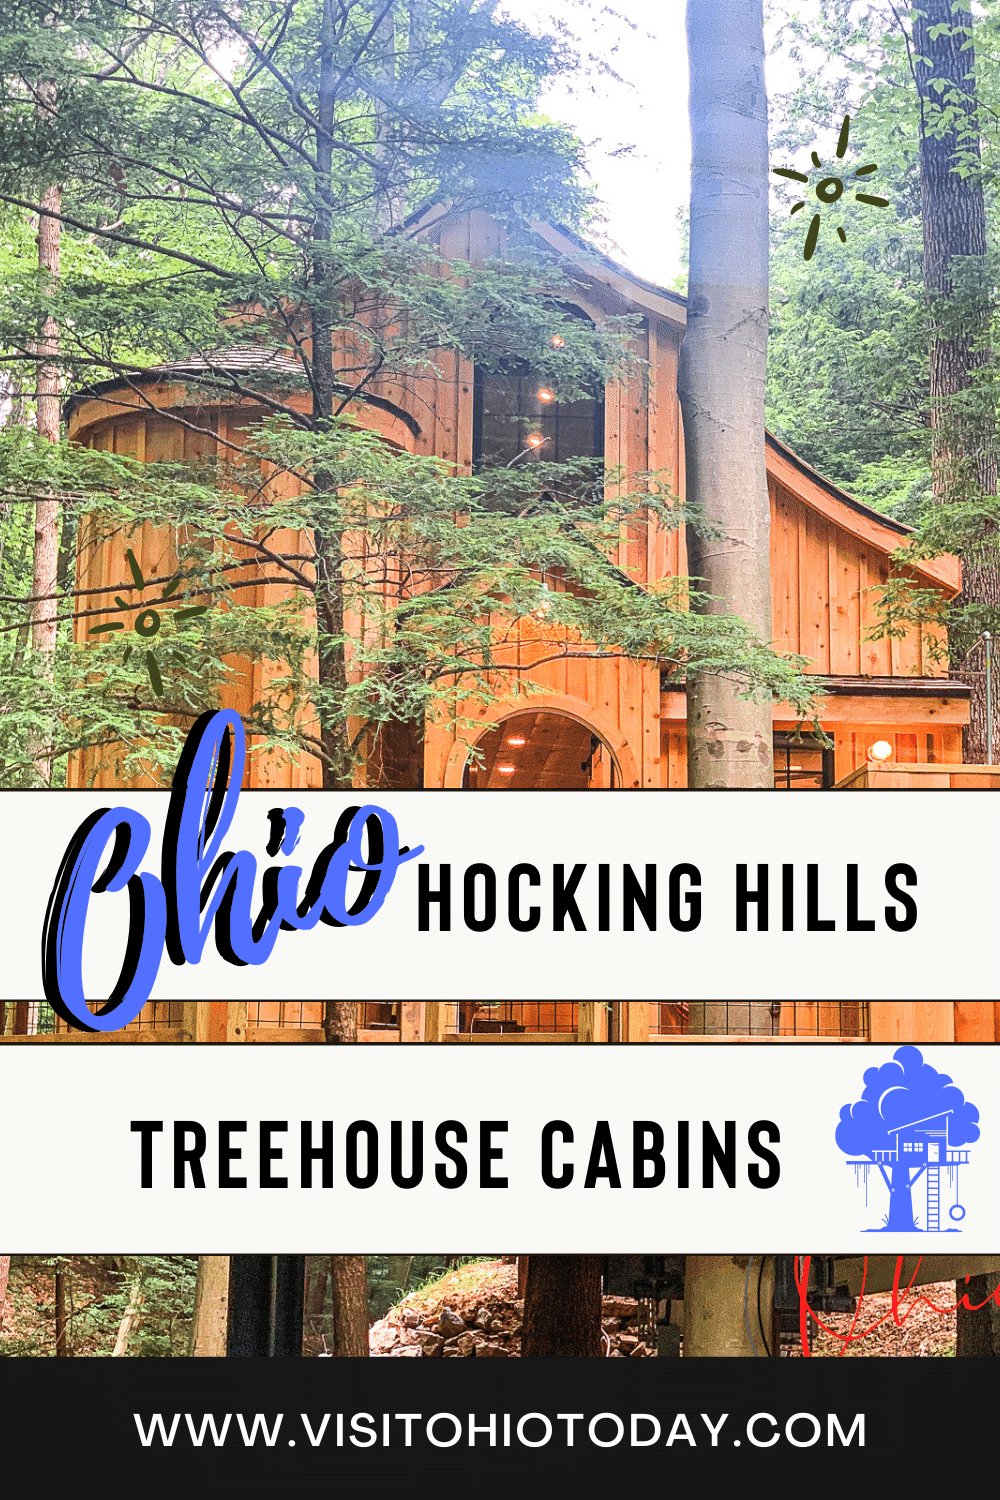 Wooden large treehouse among tall healthy trees with green leaves with text overlay: Ohio Hocking Hills Treehouse Cabins